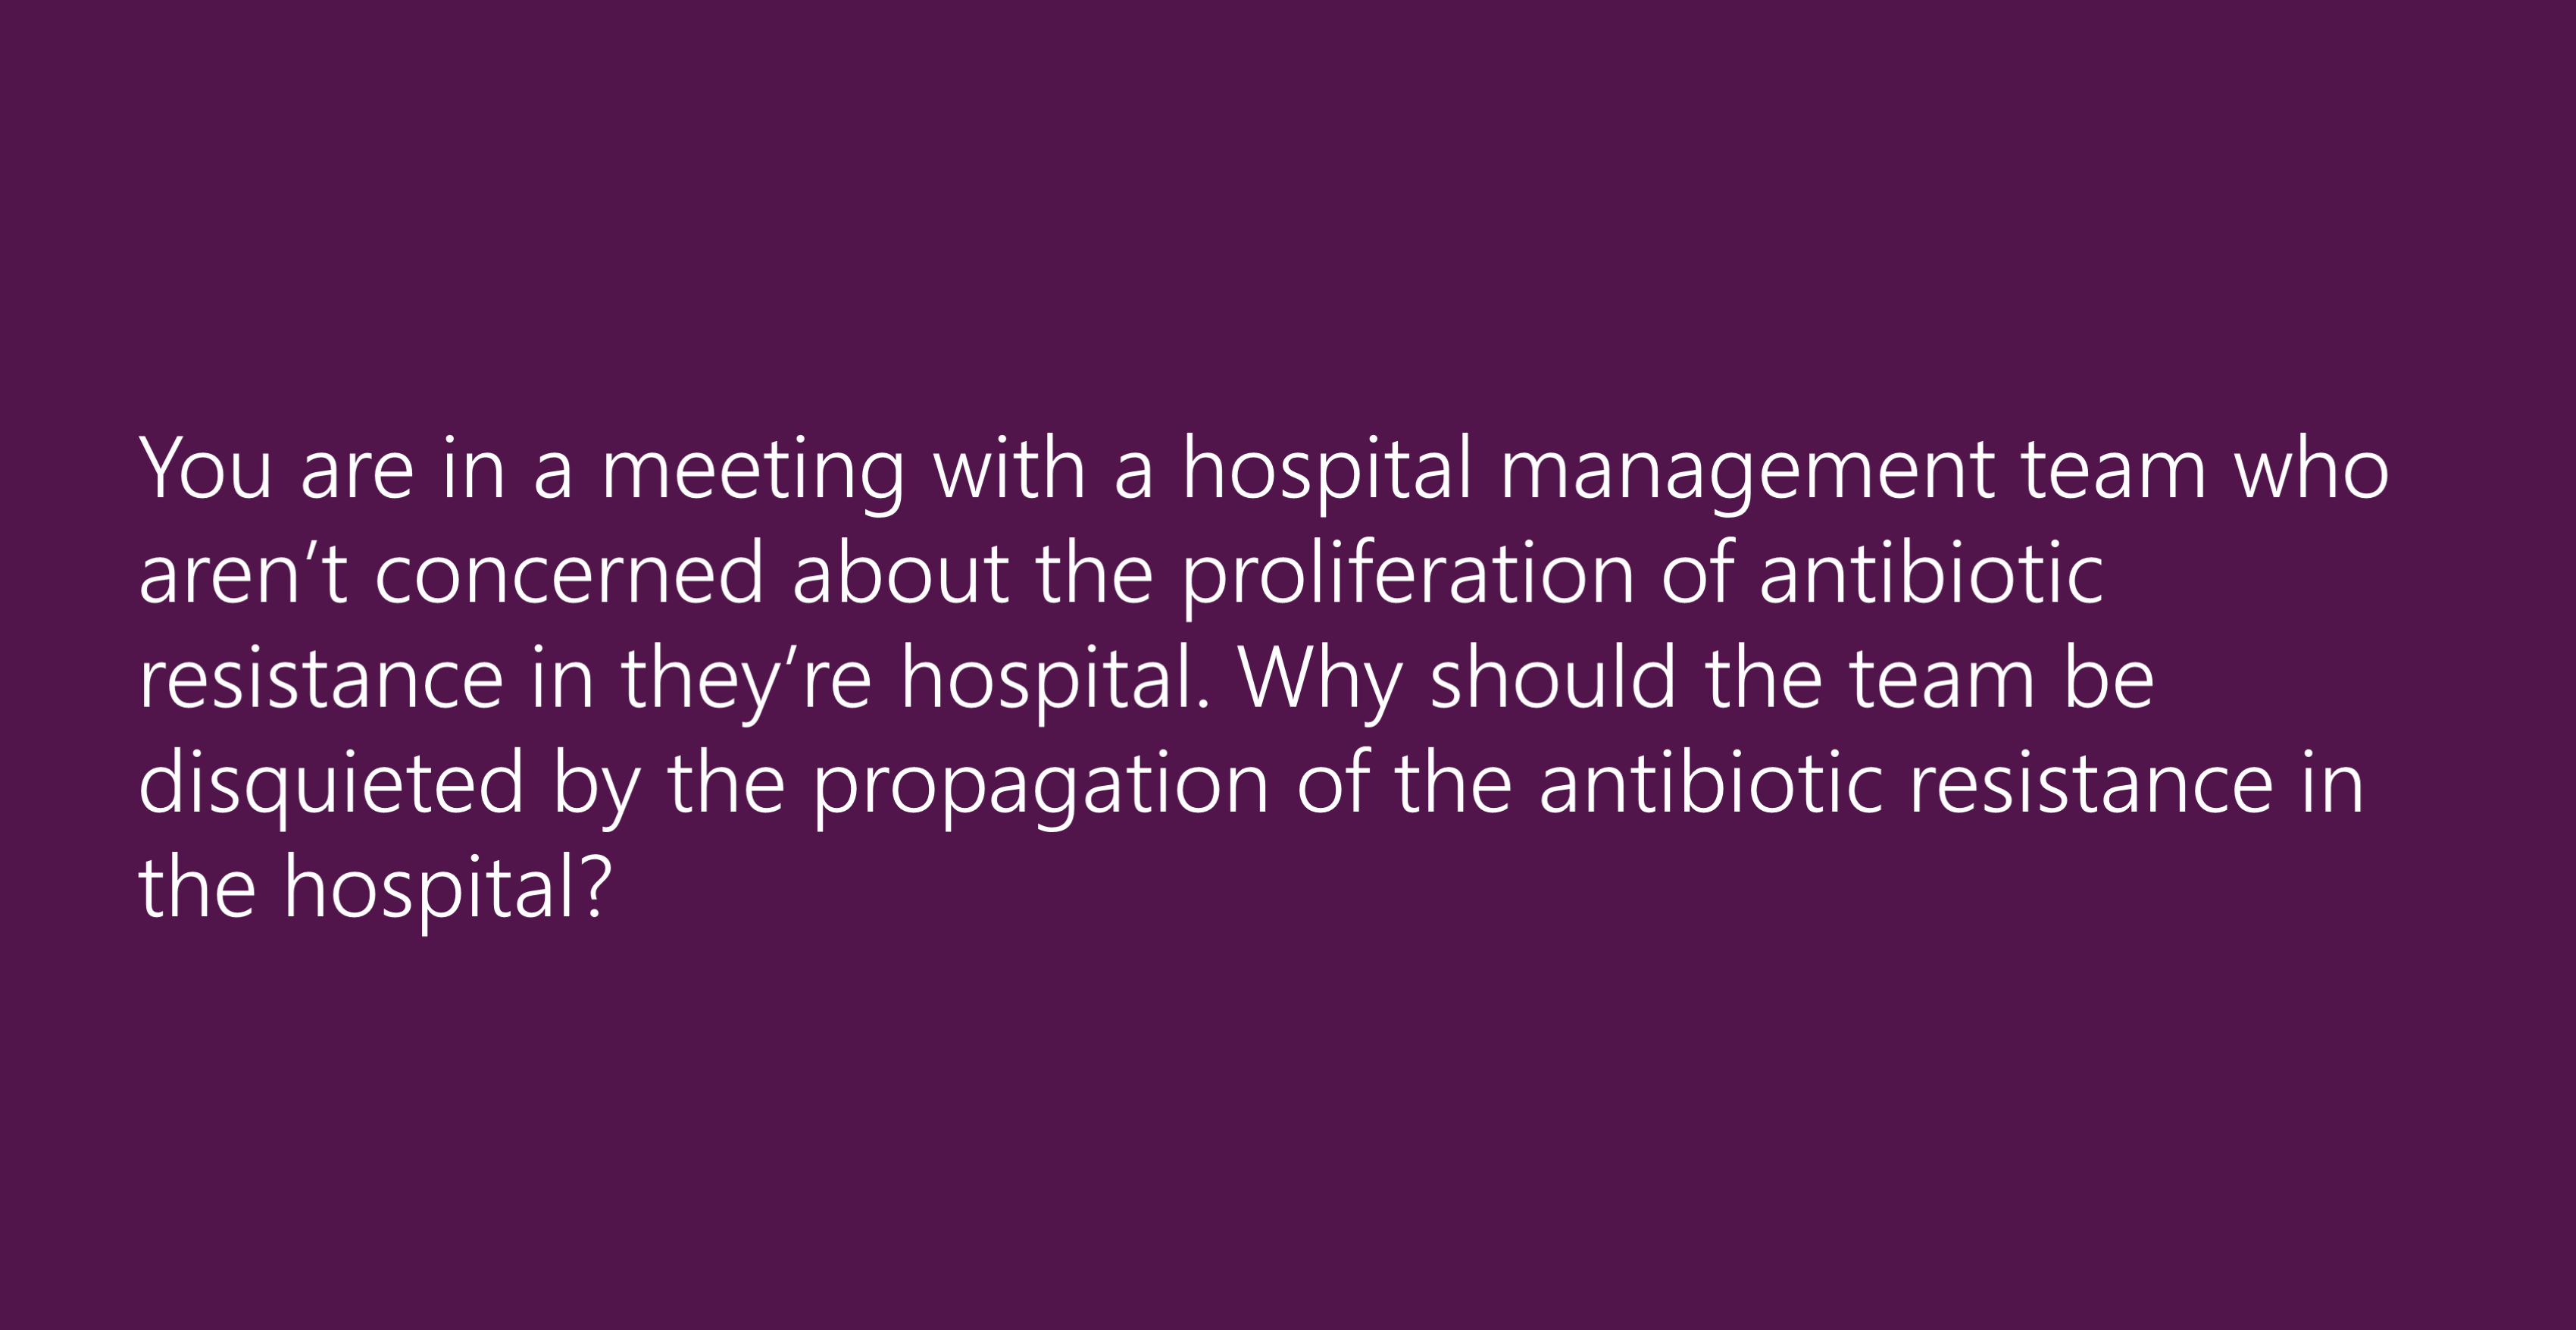 You are in a meeting with a hospital management team who aren’t concerned about the proliferation of antibiotic resistance in they’re hospital. Why should the team be disquieted by the propagation of the antibiotic resistance in the hospital?